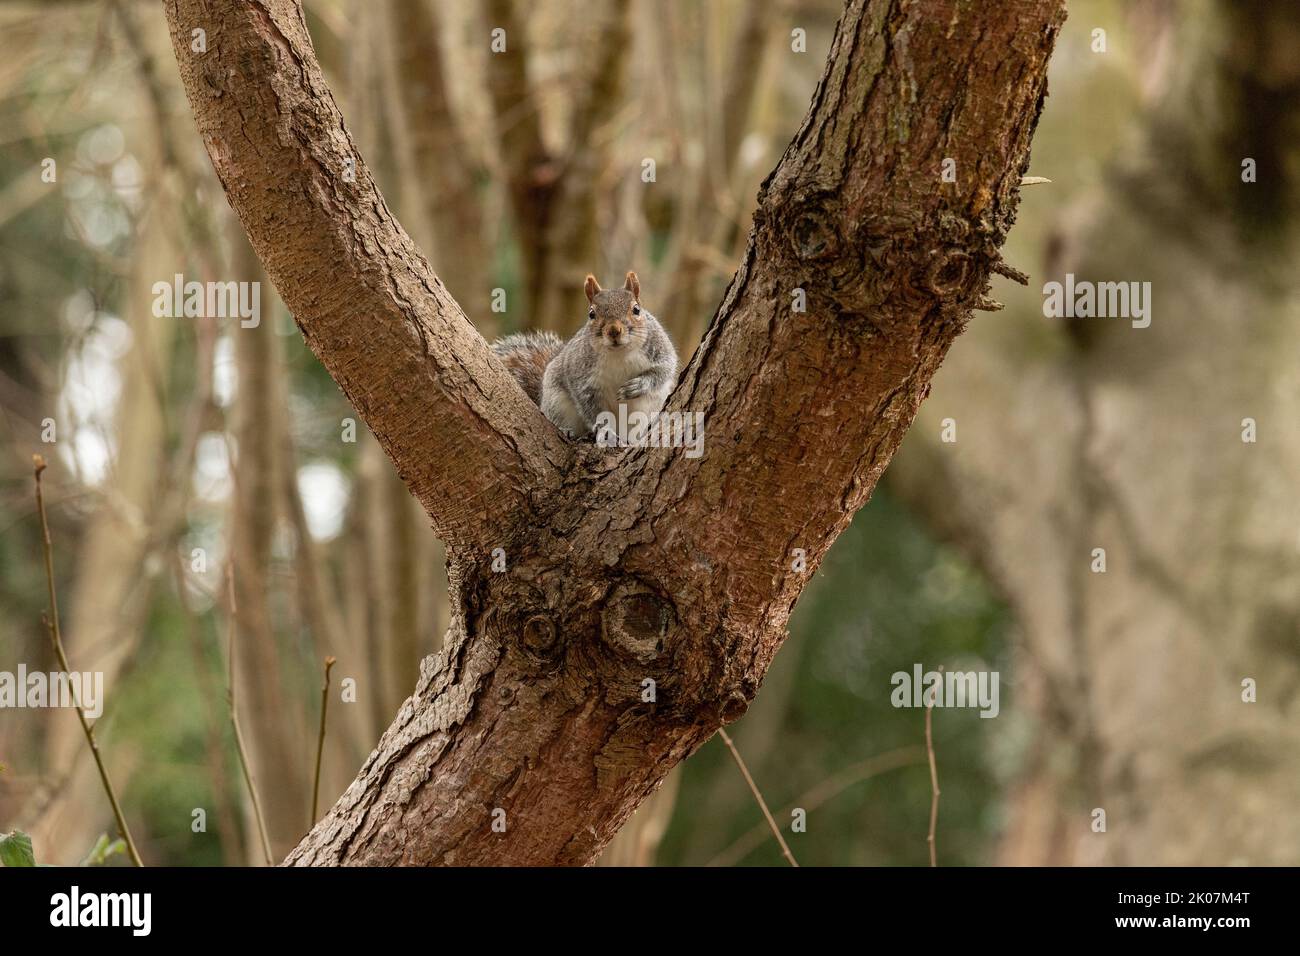 Grey UK squirrel sitting in a tree looking at the camera, in natural environment Stock Photo